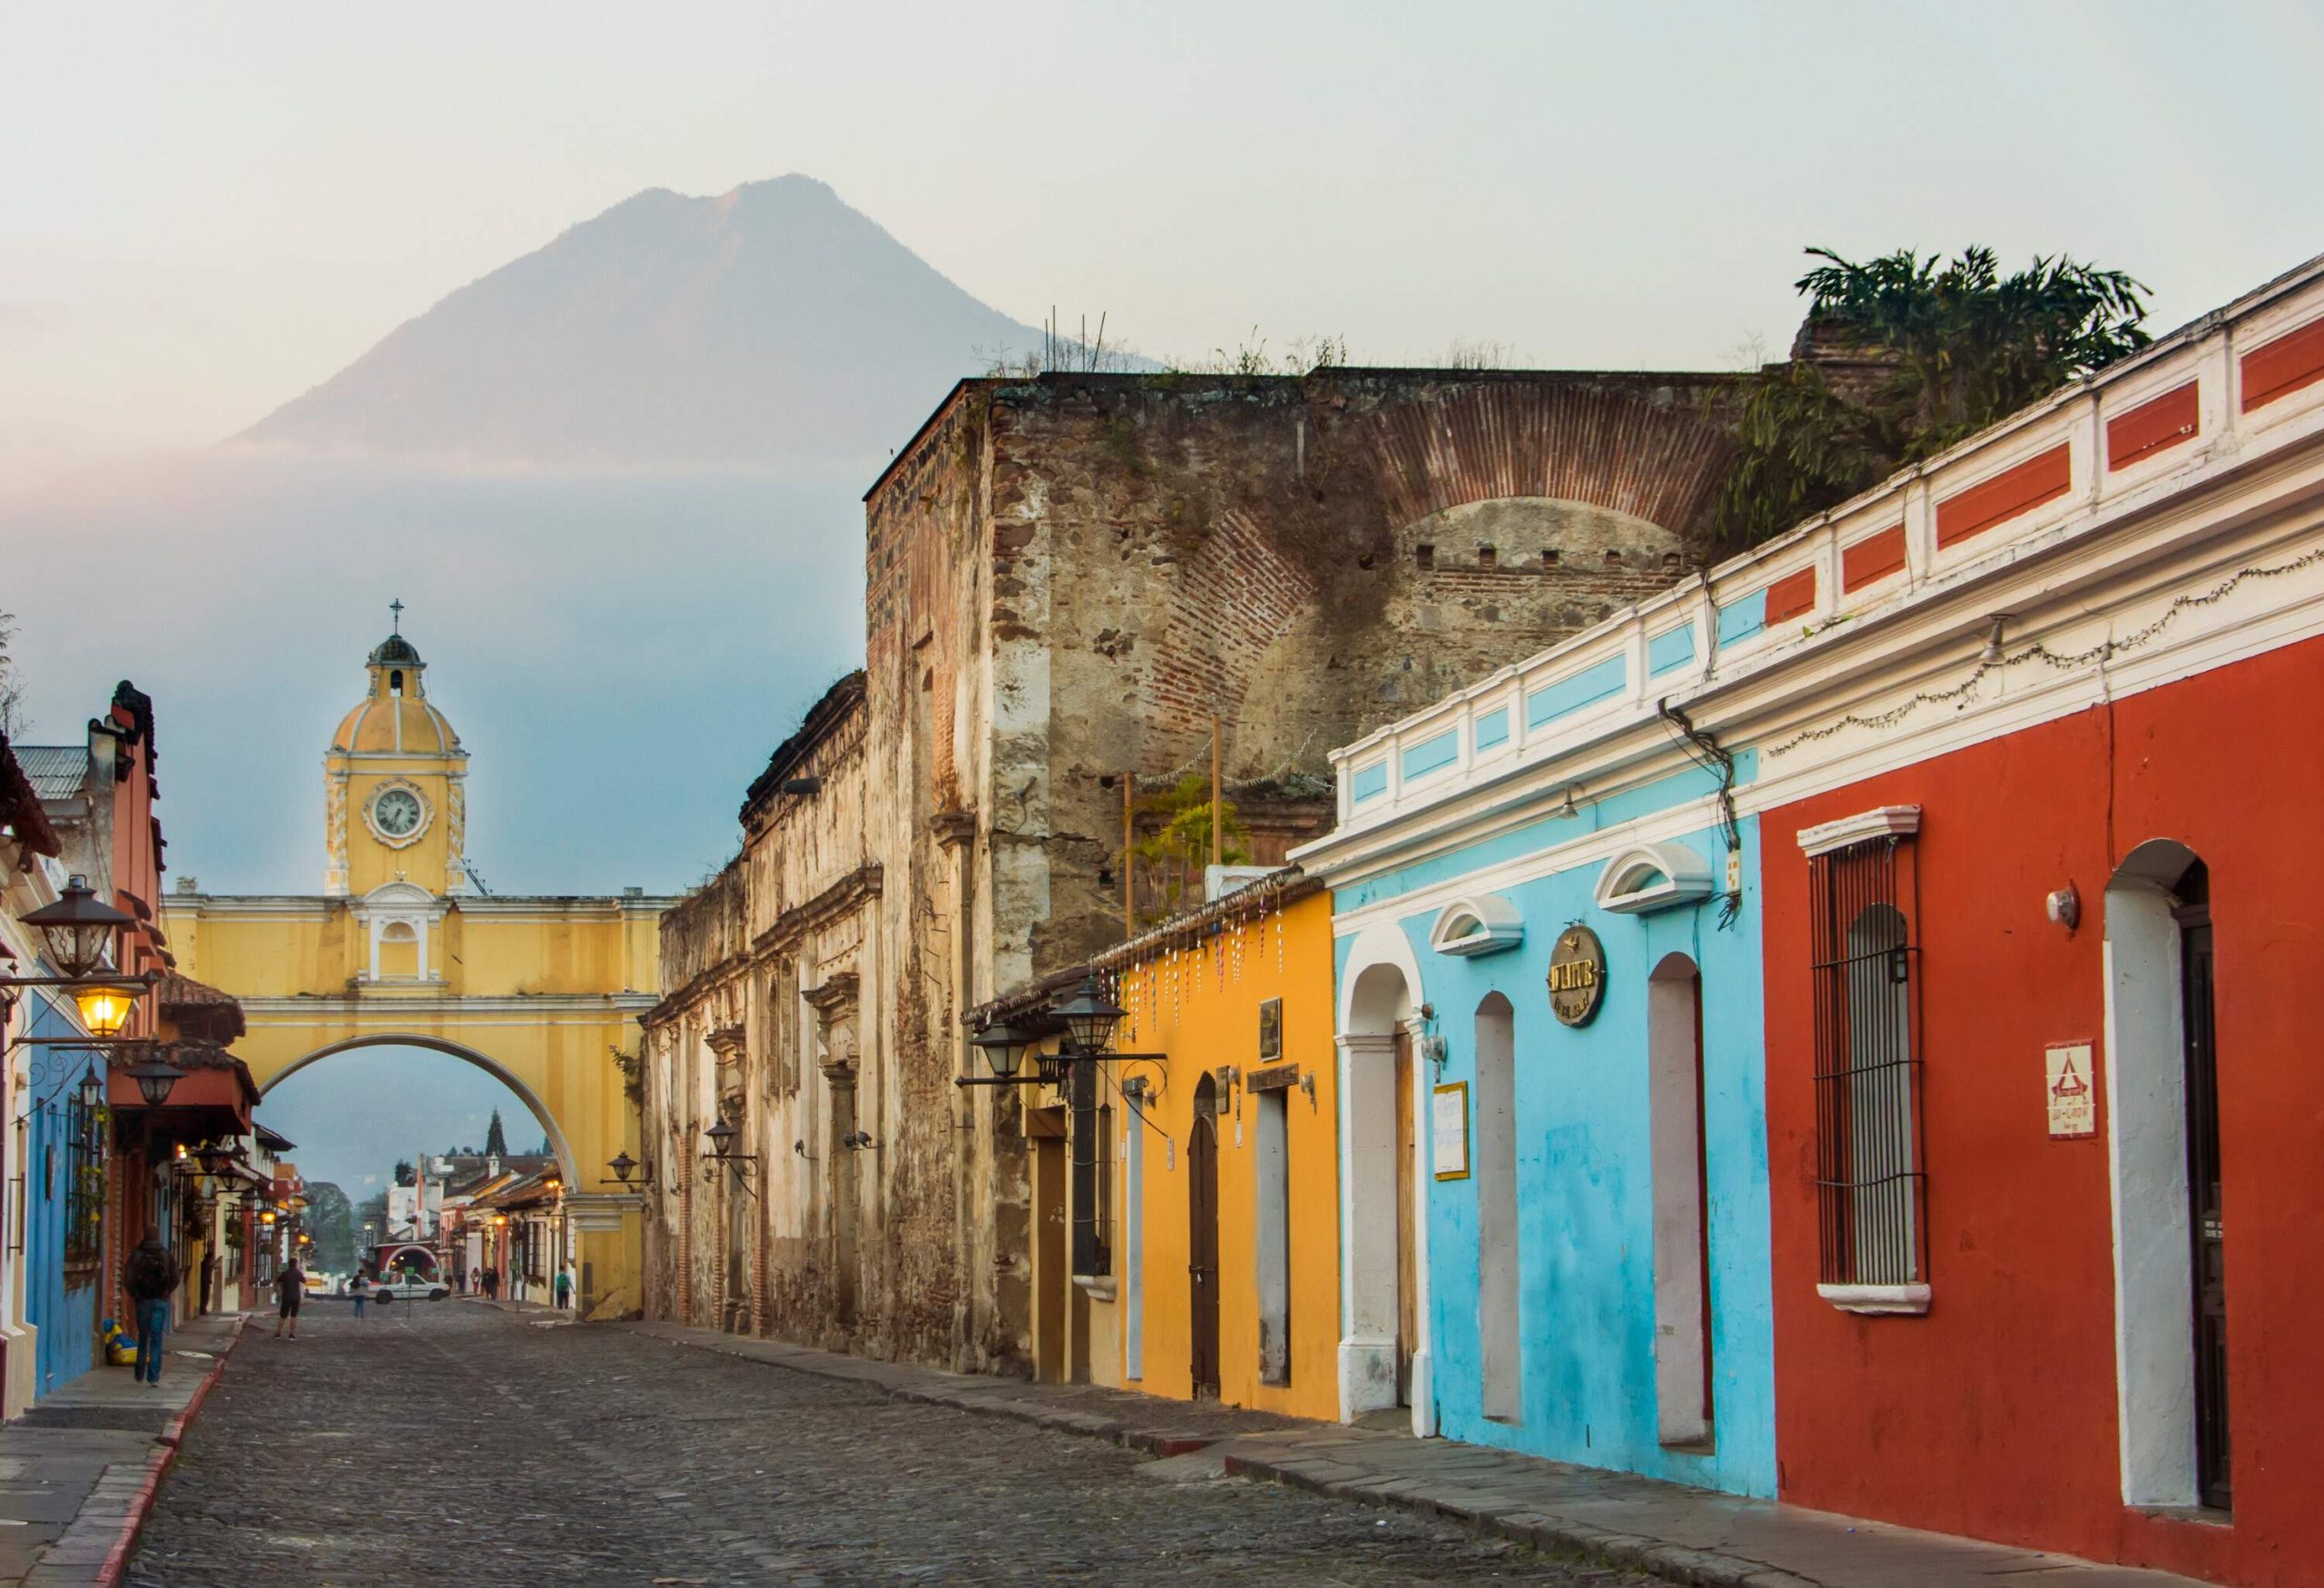 A charming cobblestone street meanders through a row of vividly painted houses with flat roofs, guiding the way towards a vibrant archway where a mist-shrouded volcano looms mysteriously in the distant backdrop.